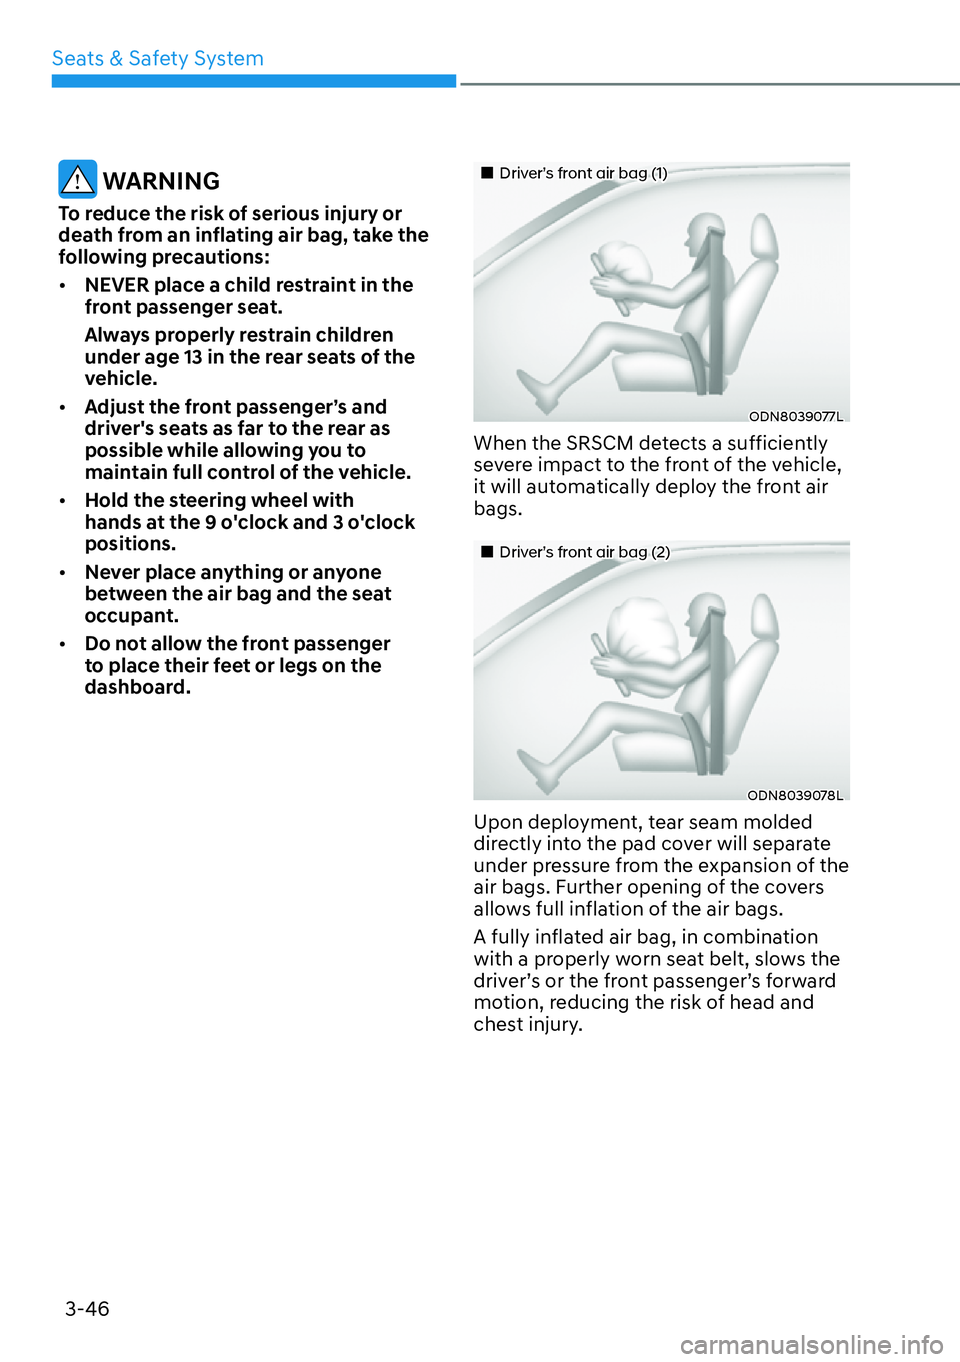 HYUNDAI KONA 2023  Owners Manual Seats & Safety System3-46
 WARNING
To reduce the risk of serious injury or 
death from an inflating air bag, take the 
following precautions:
[� NEVER place a child restraint in the 
front passenger